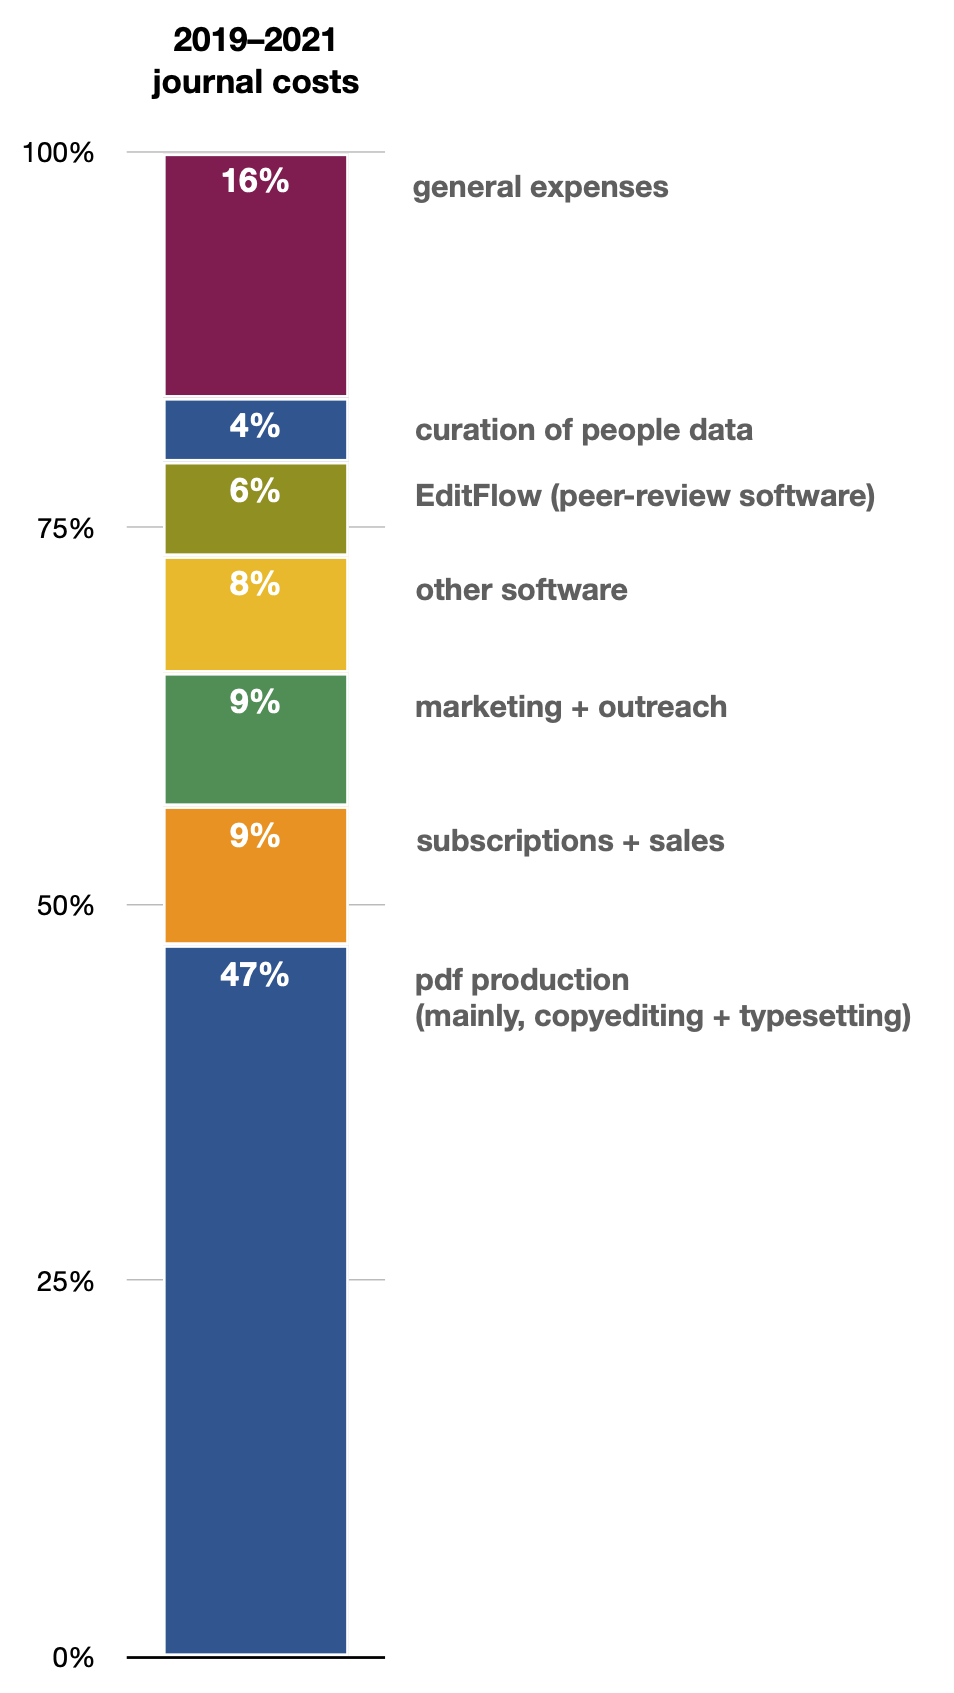 Stacked bar graph for the breakdown of electronic journal publishing costs, 2019-2021, showing: 16% general expenses; 4% curation of people data; 6% EditFlow (peer-review software); 8% other software; 9% marketing + outreach; 9% subscriptions + sales; 47% pdf production (mainly, copyediting + typesetting).